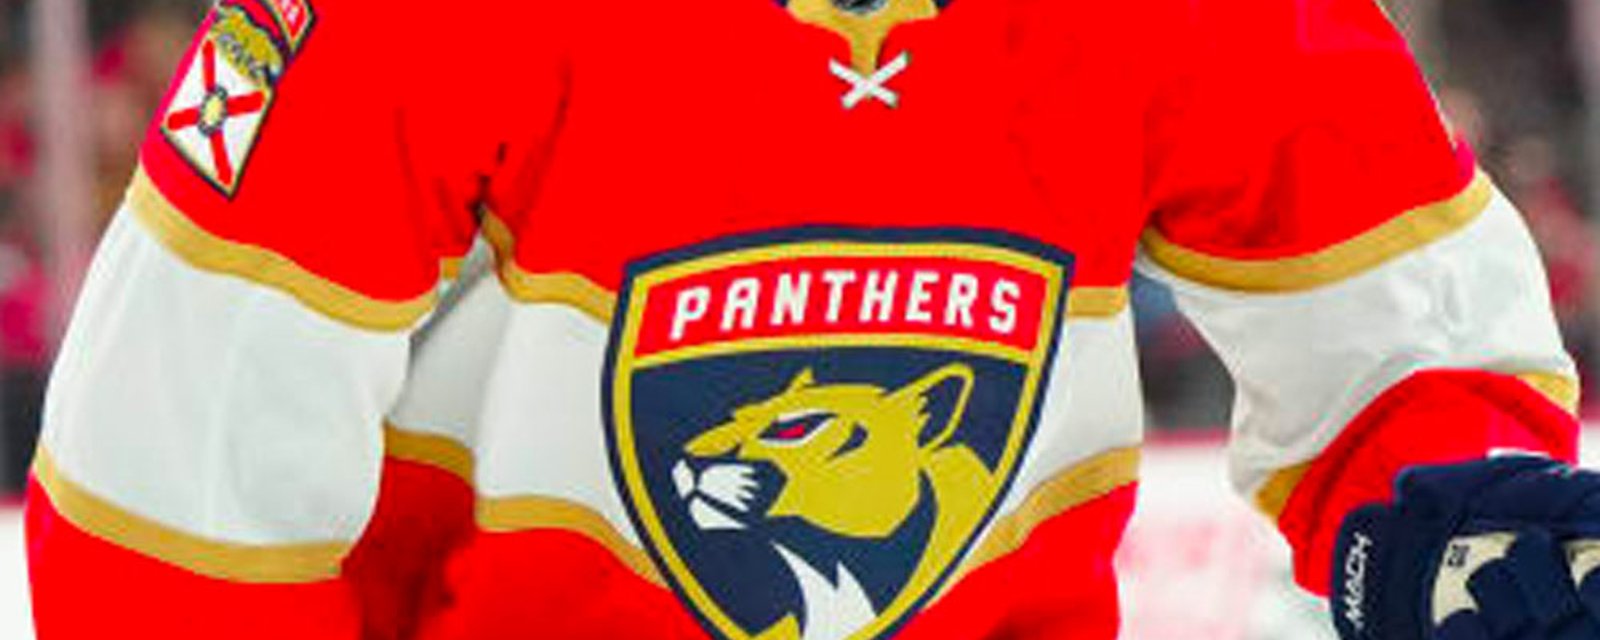 Major development concerning two of the Panthers' biggest players